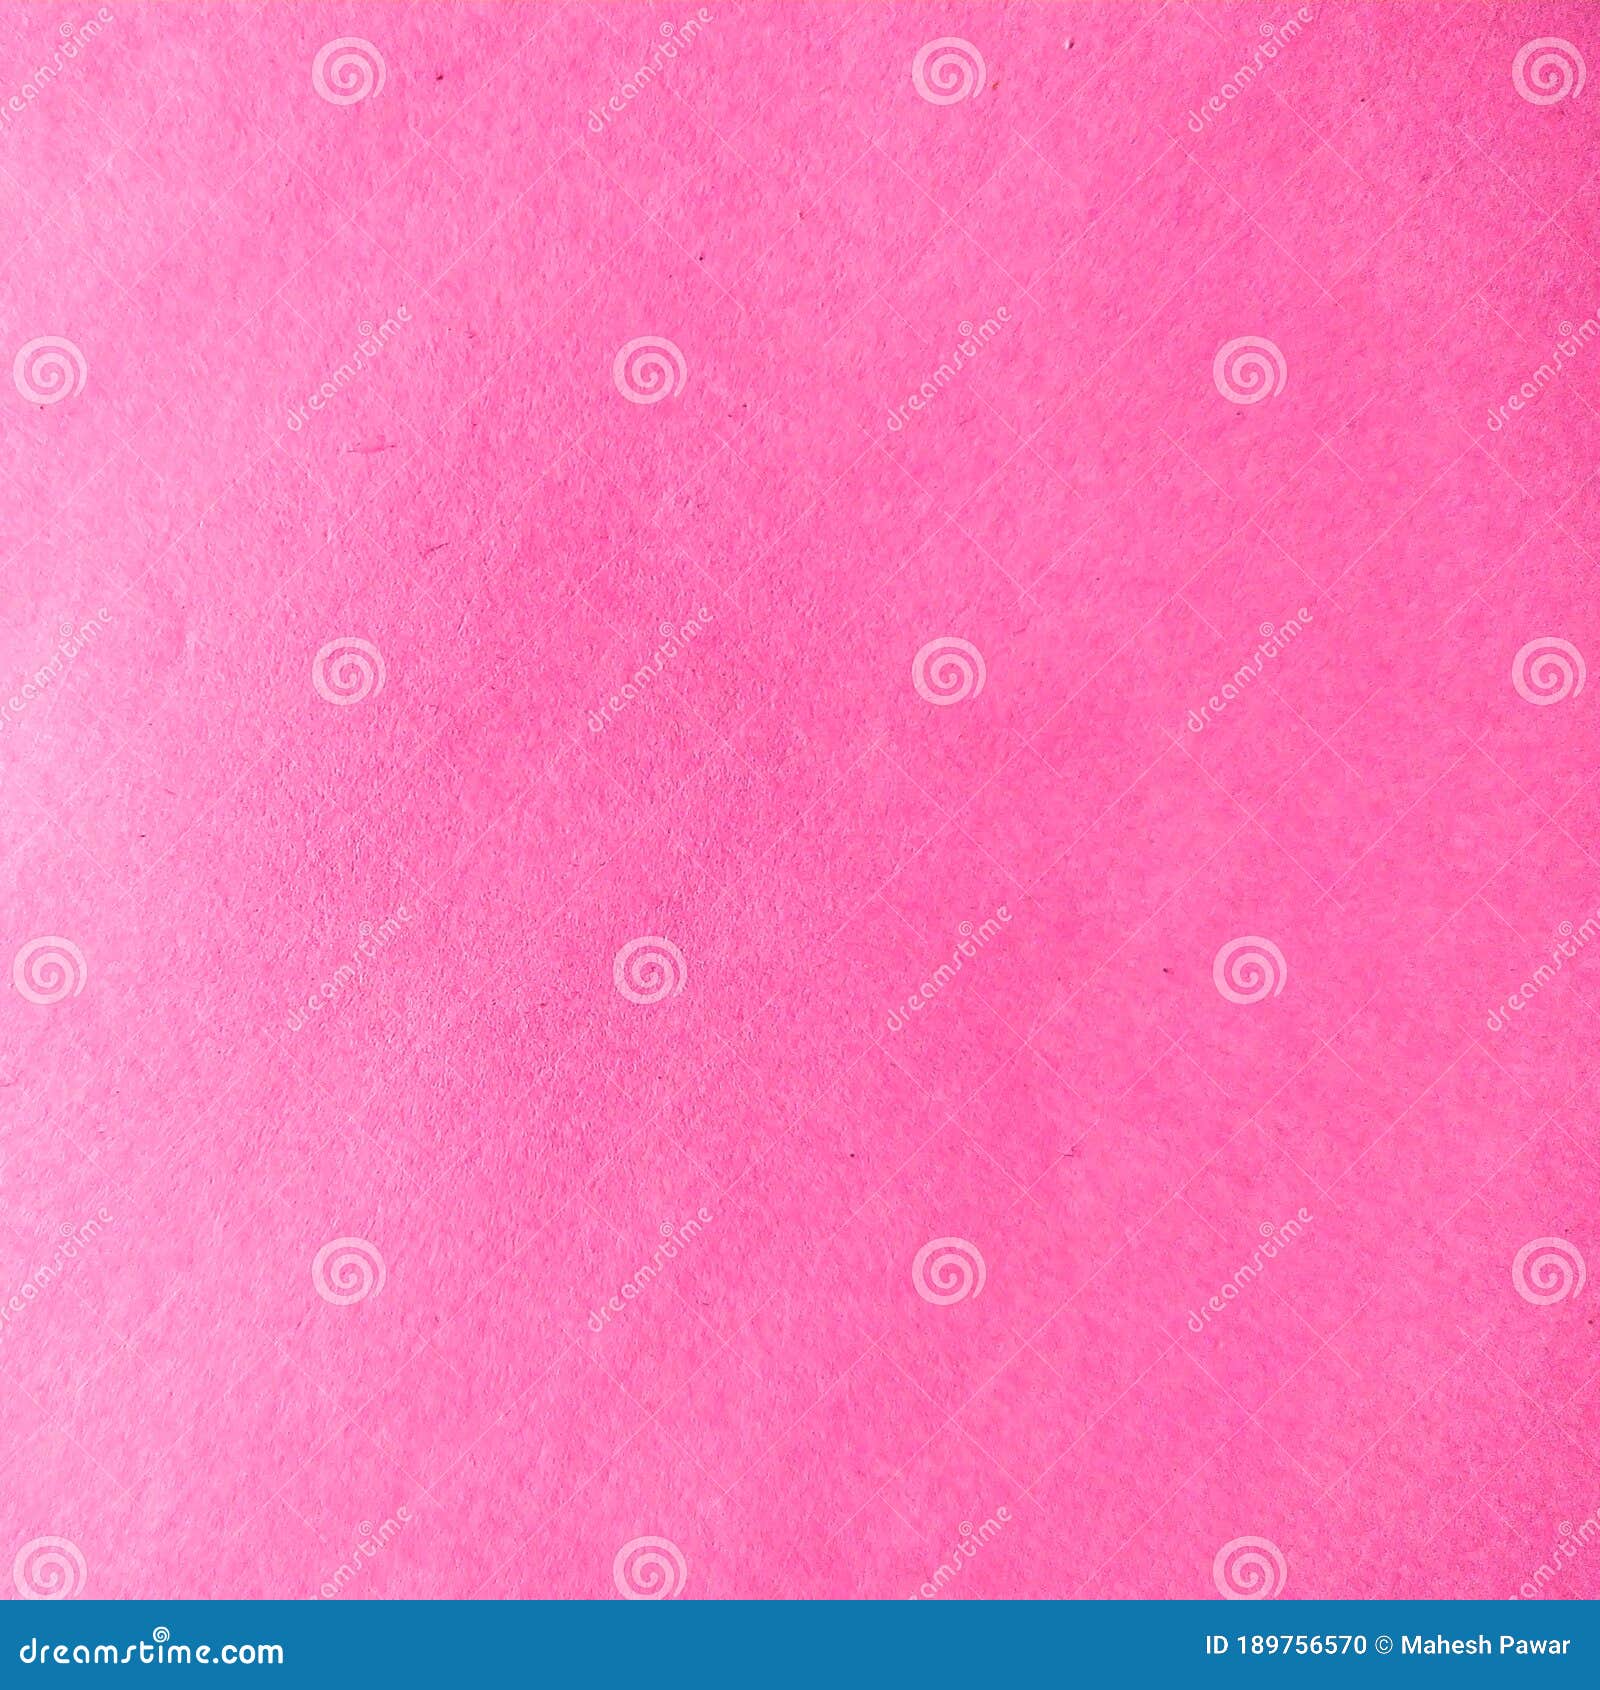 Best Faint Pink Colour Textured Background Stock Photo - Image of ...